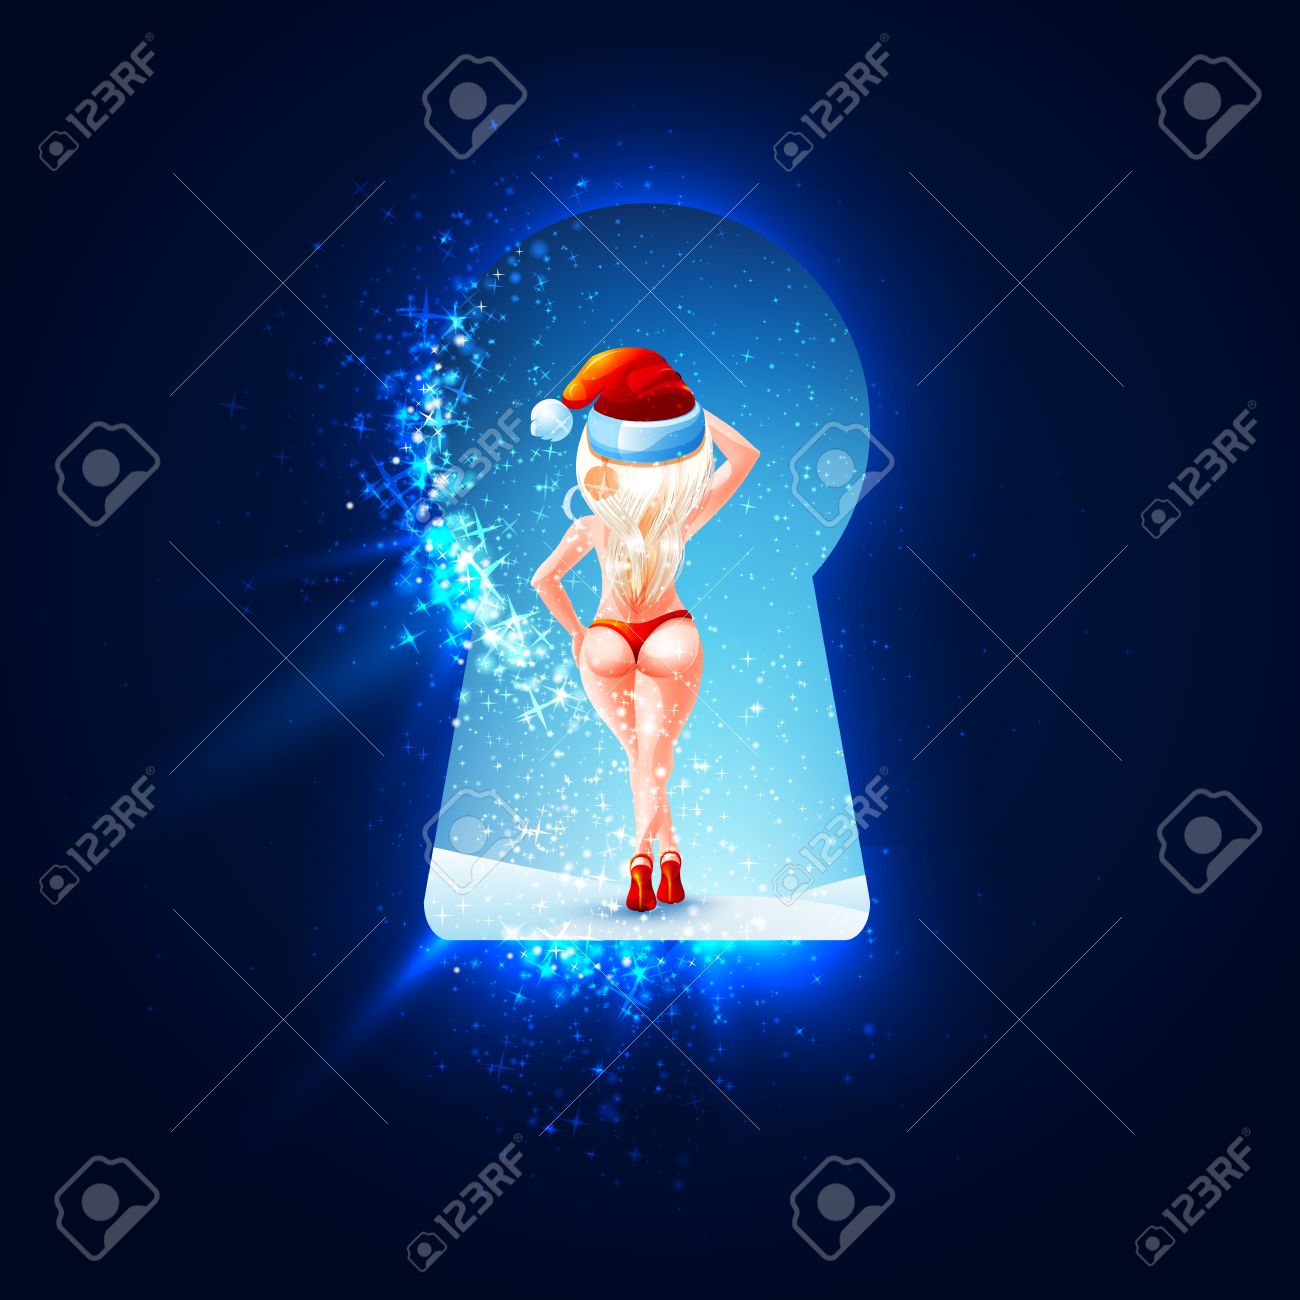 33772360-happy-new-year-merry-christmas-stock-naked-girl-in-a-santa-claus-hat-on-high-heels-and-panties-walki-stock-vector.jpg